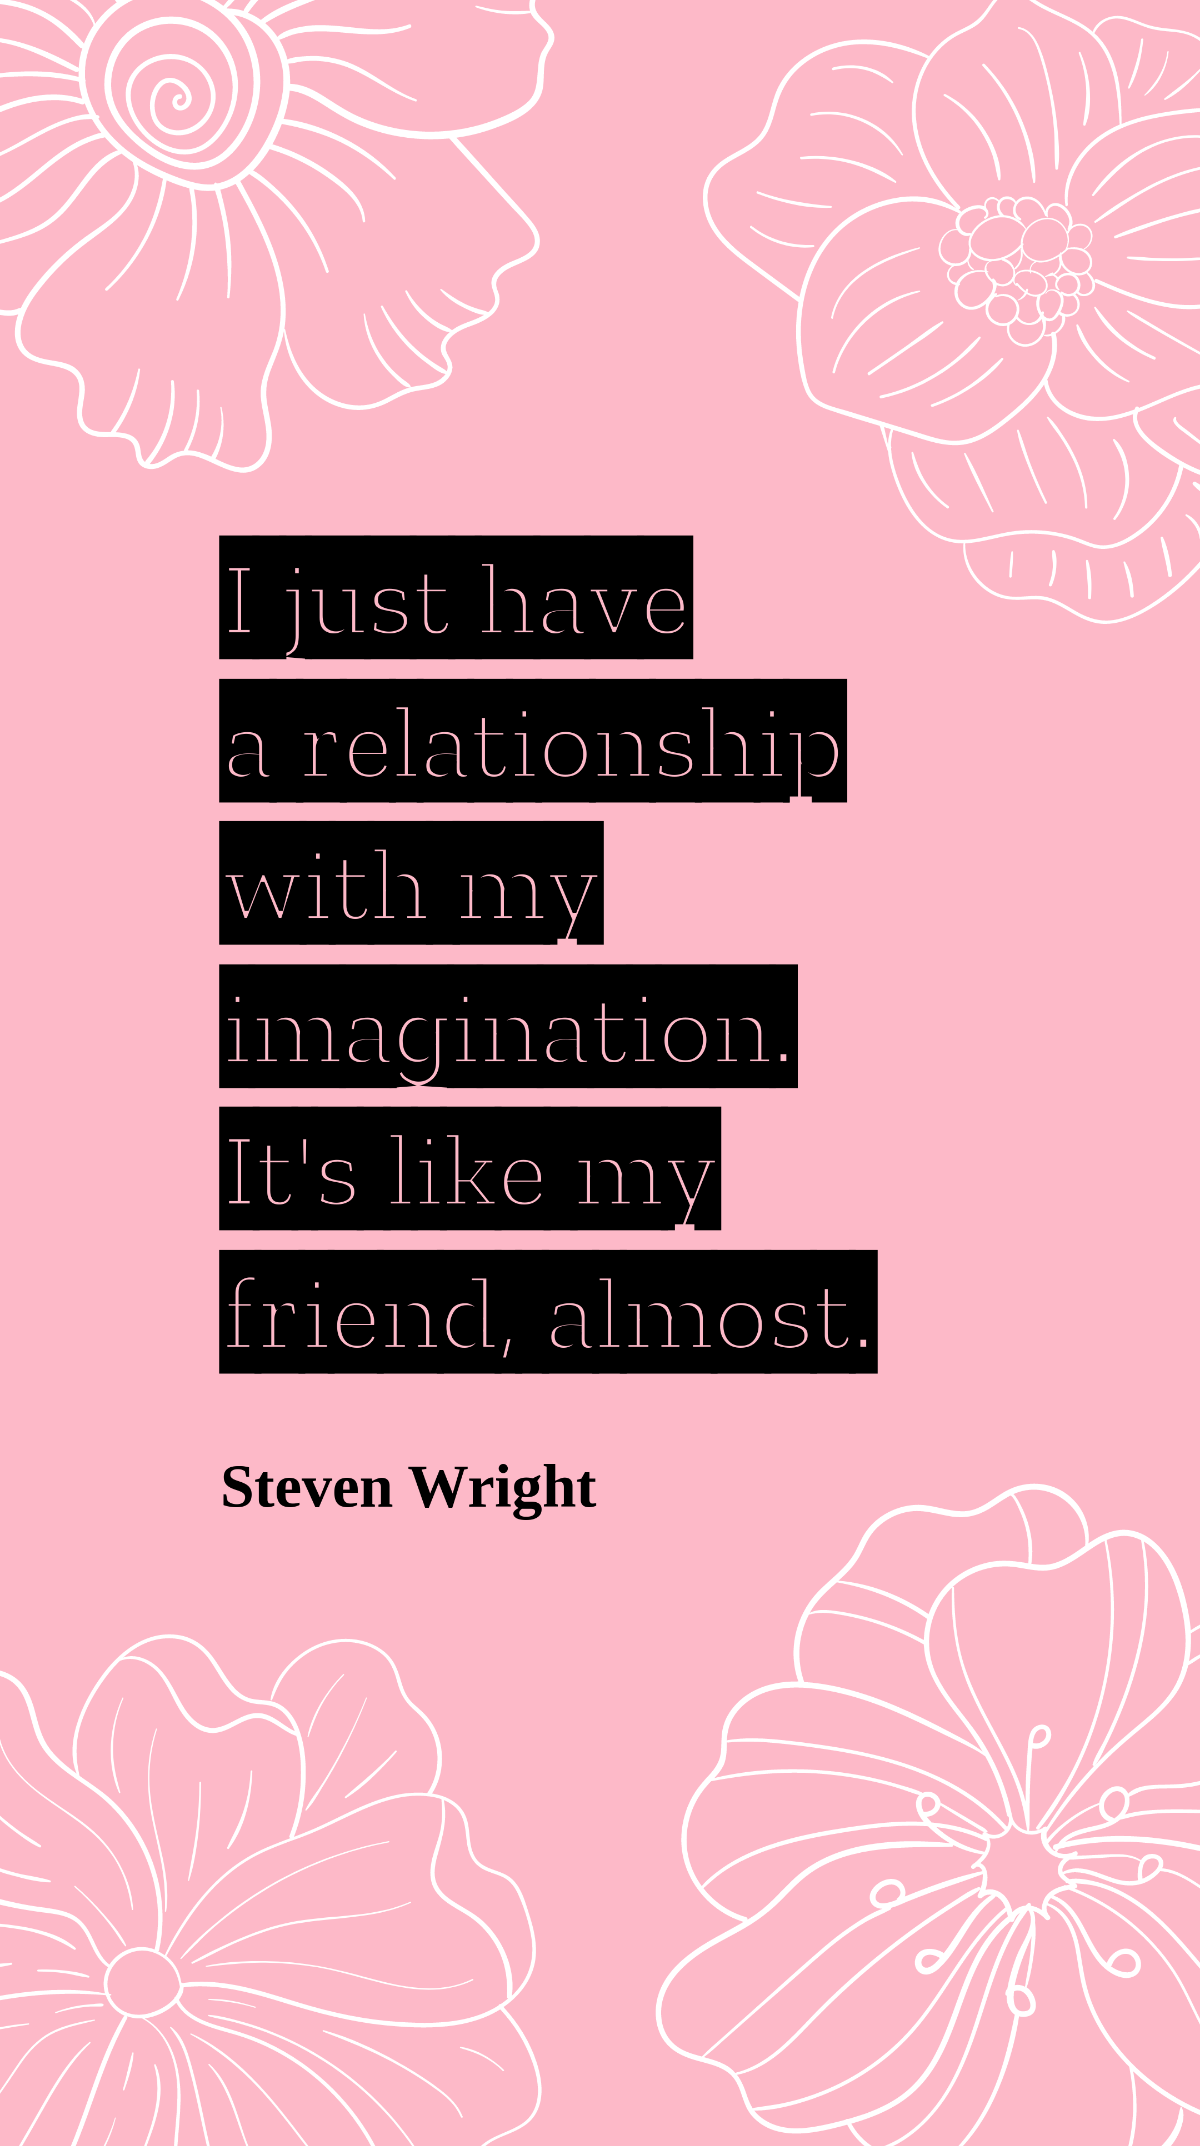 Steven Wright - I just have a relationship with my imagination. It's like my friend, almost. Template